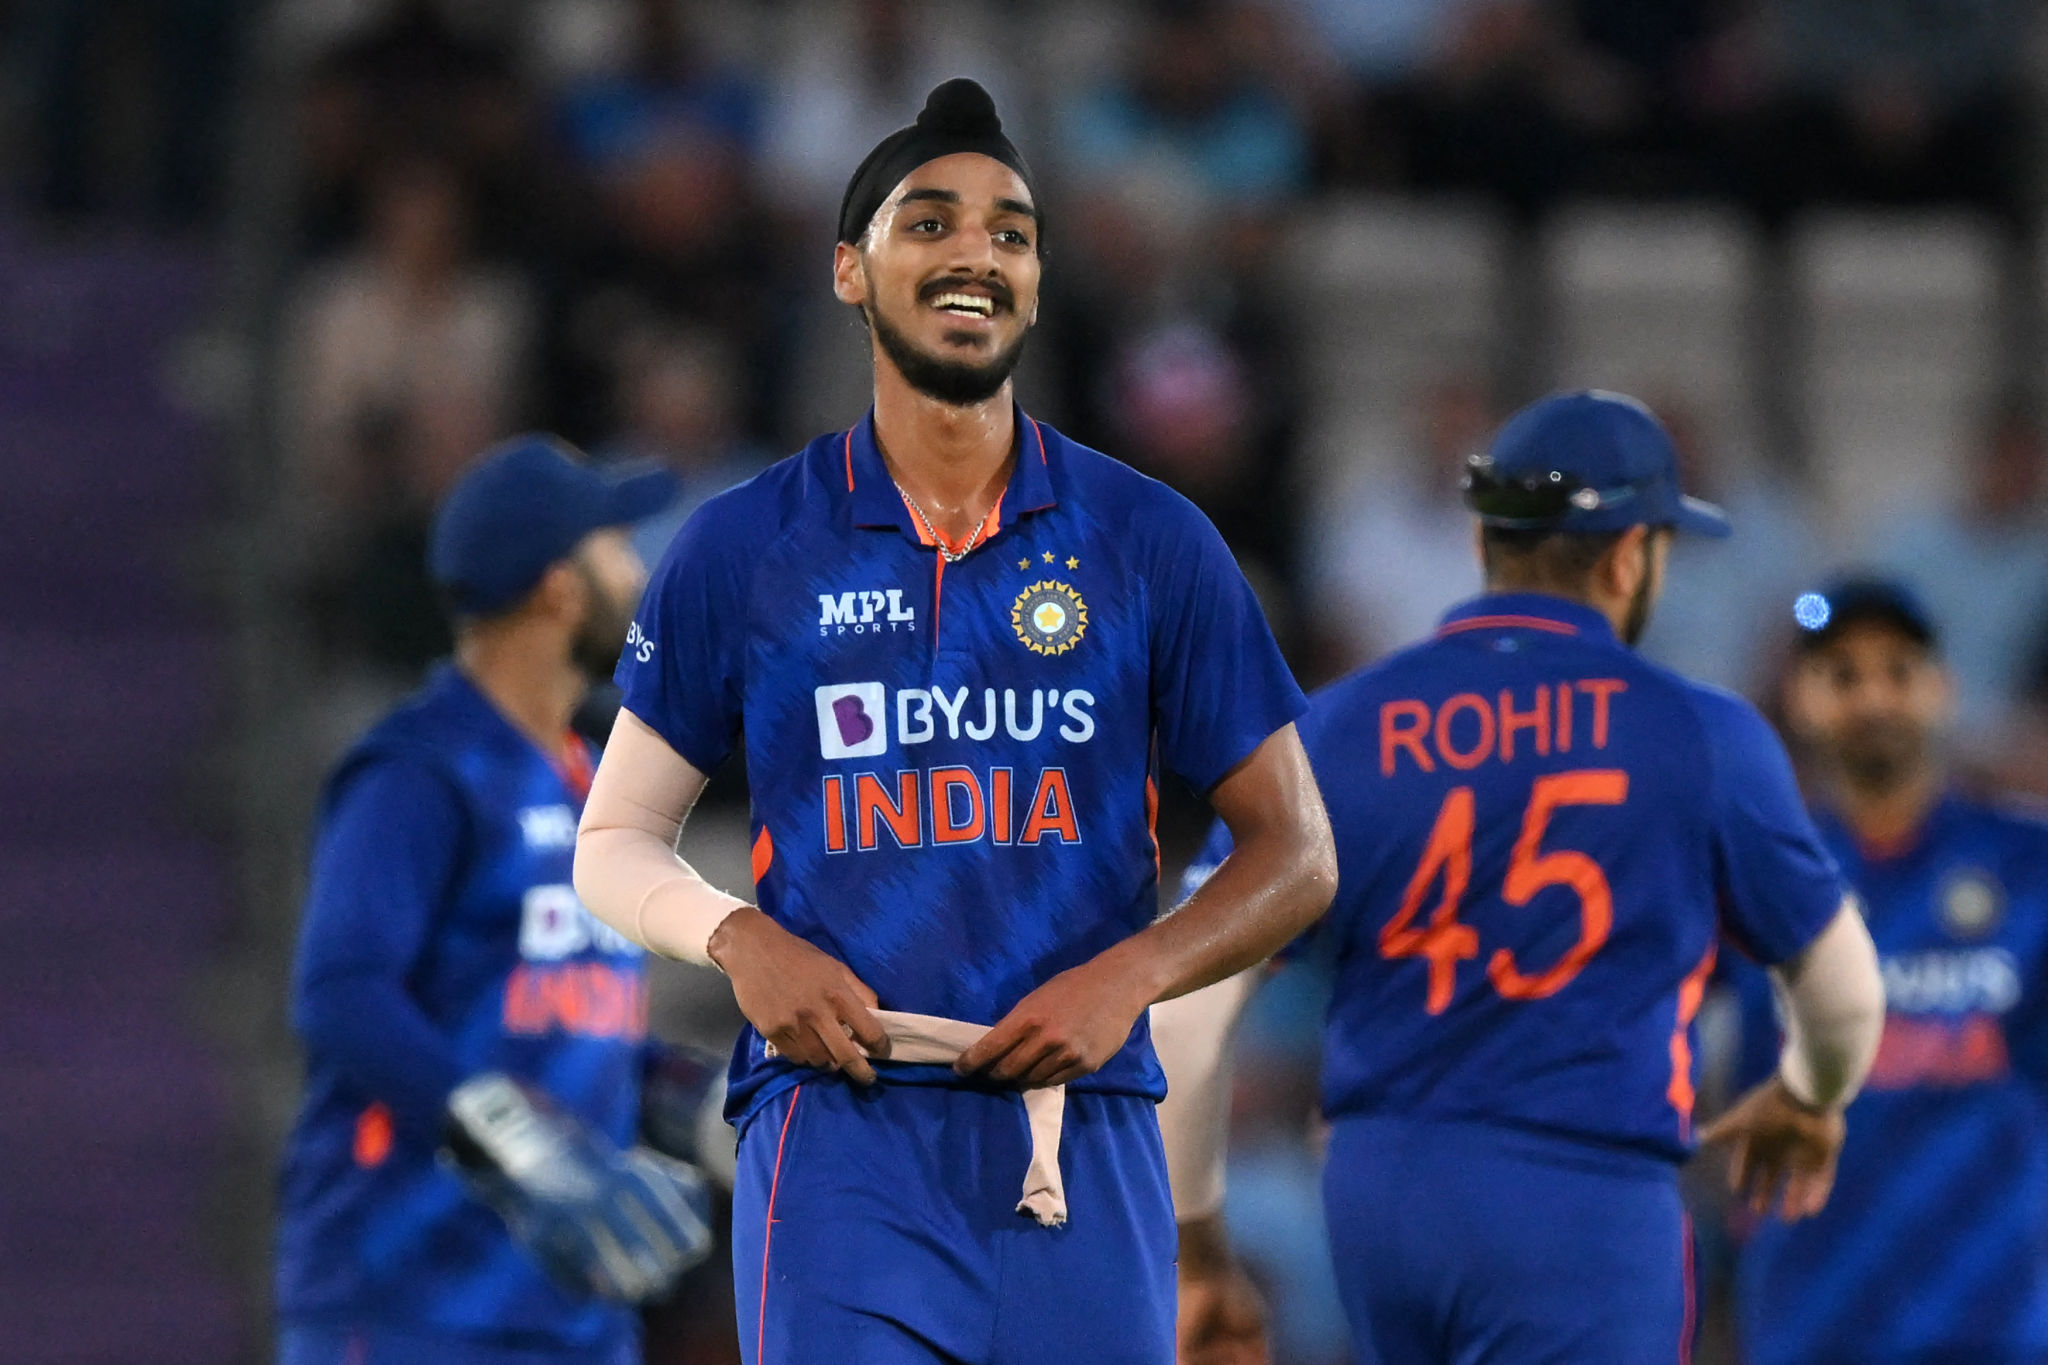 India Playing XI vs WI: Arshdeep Singh likely to make ODI debut, BIG headache for Rahul Dravid on combinations: IND vs WI 1st ODI LIVE, India vs WestIndies LIVE